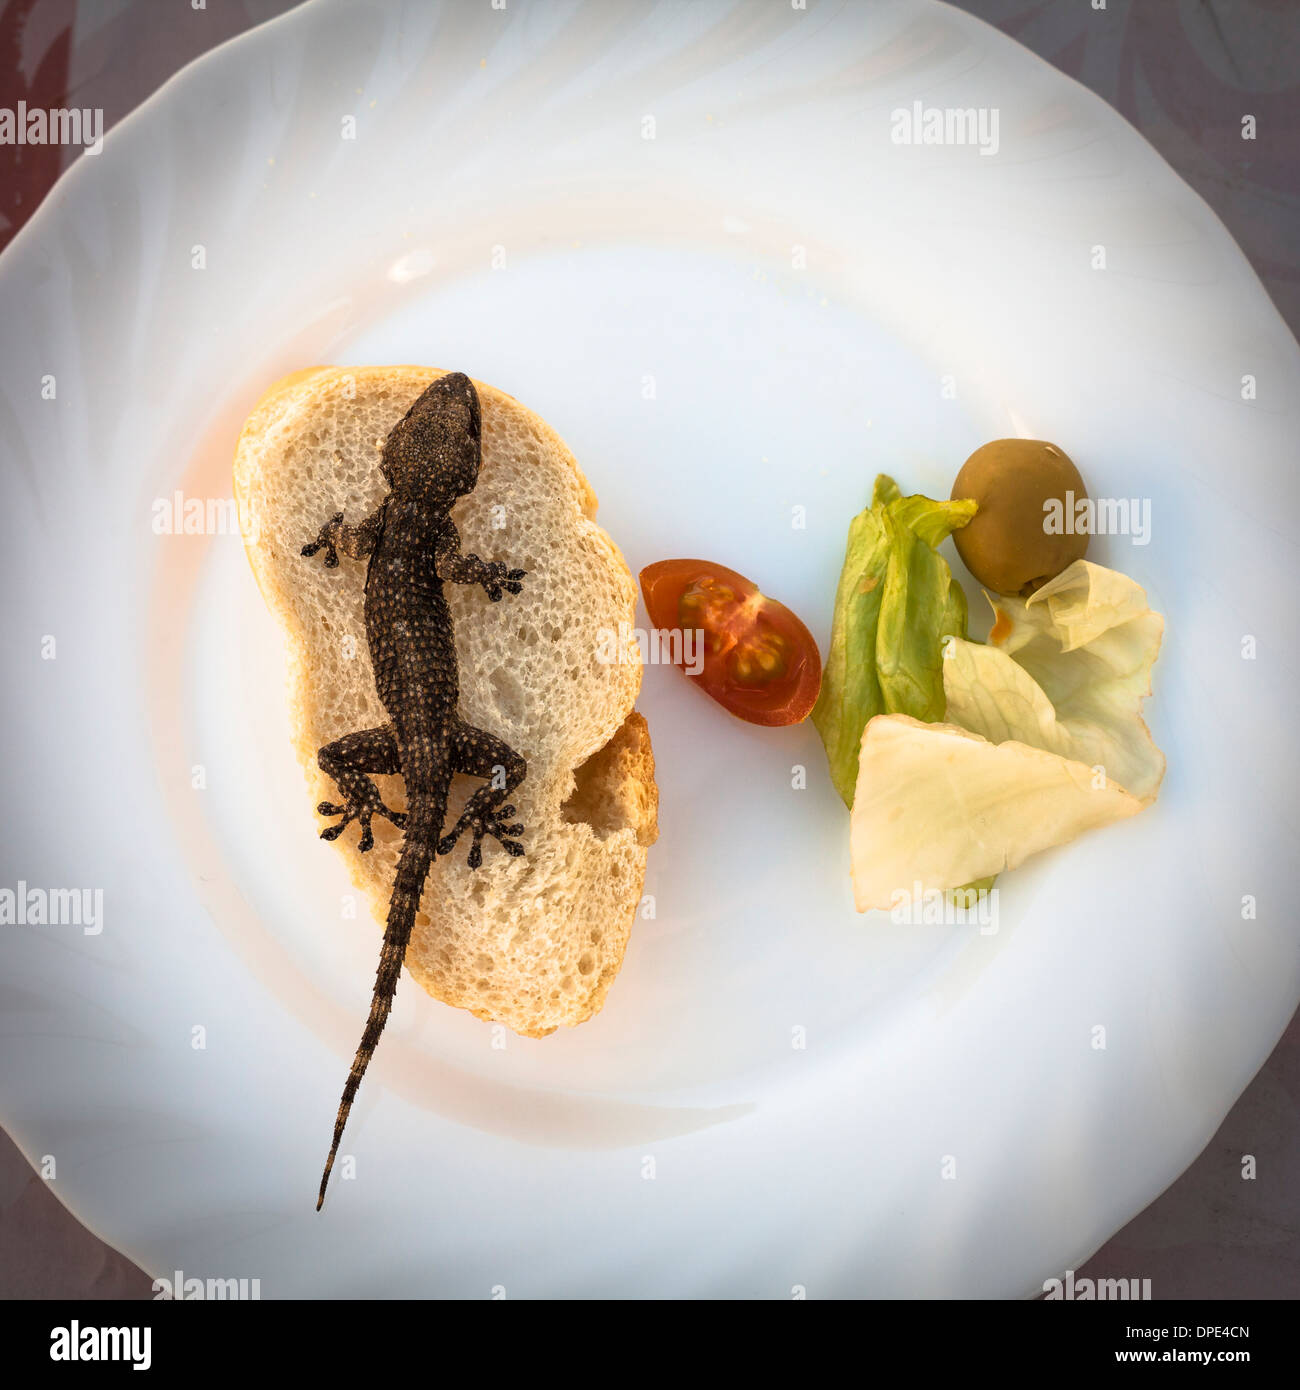 Lizard and bread with vegetable on plate Stock Photo